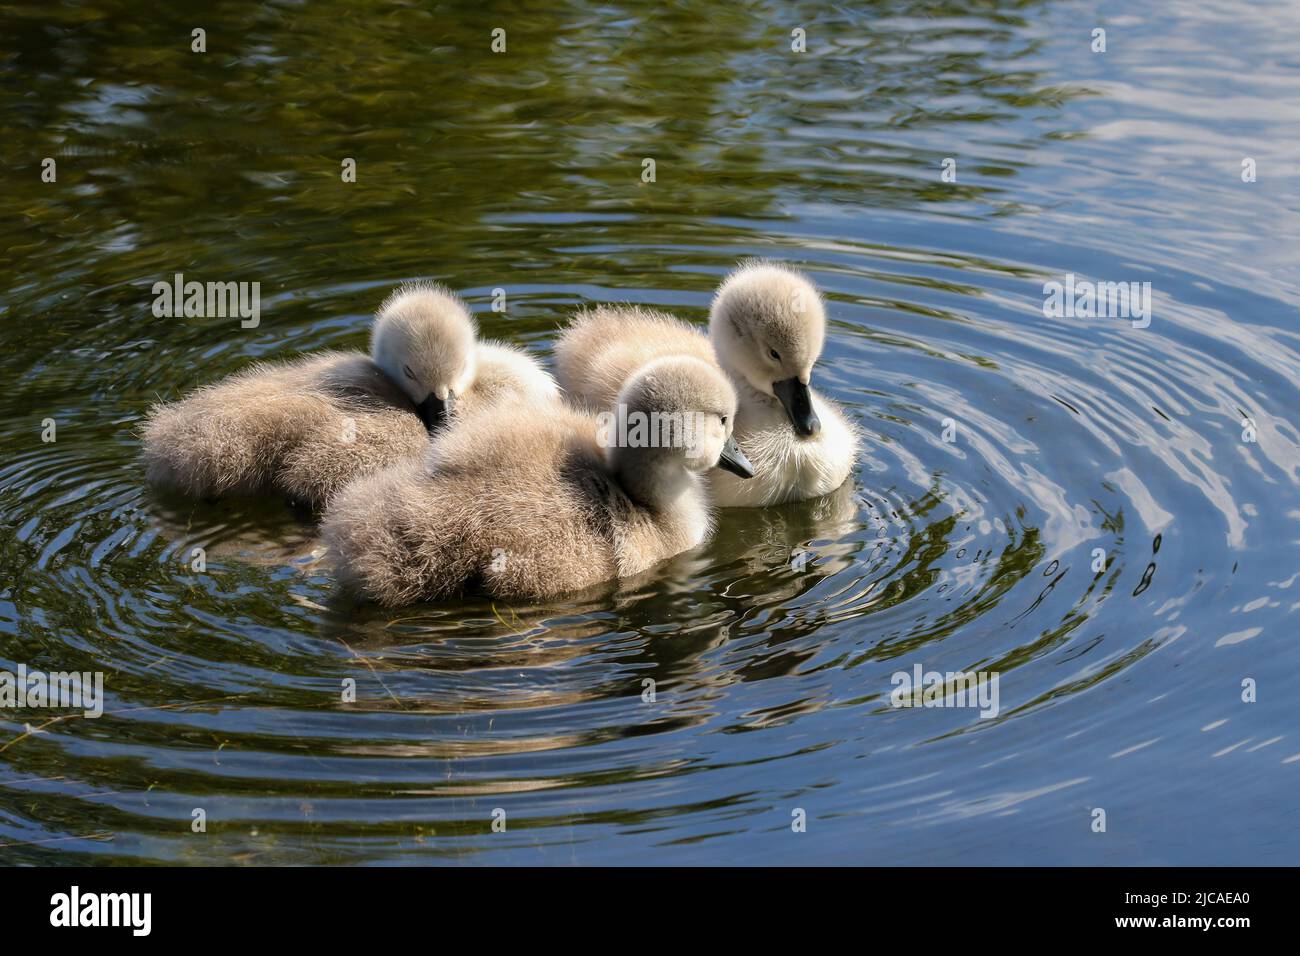 Three swan cygnets with soft fluffy down feathers float on canal water. One asleep. Circular water ripples. Grand Canal, Dublin, Ireland Stock Photo